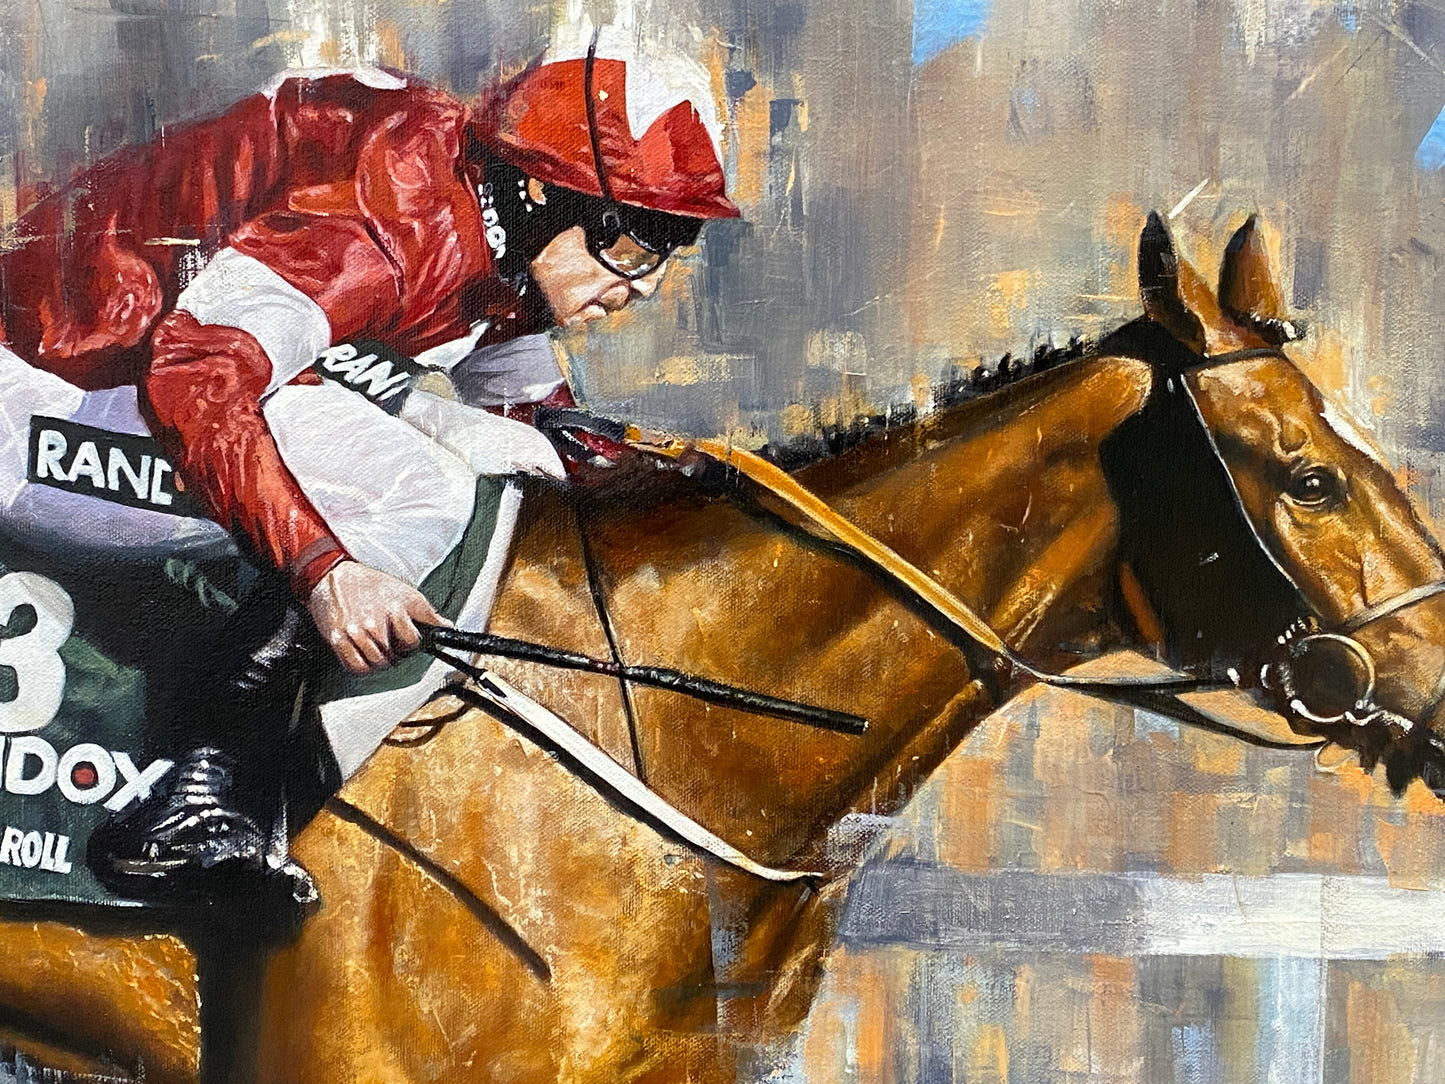 Grand National Tiger Roll